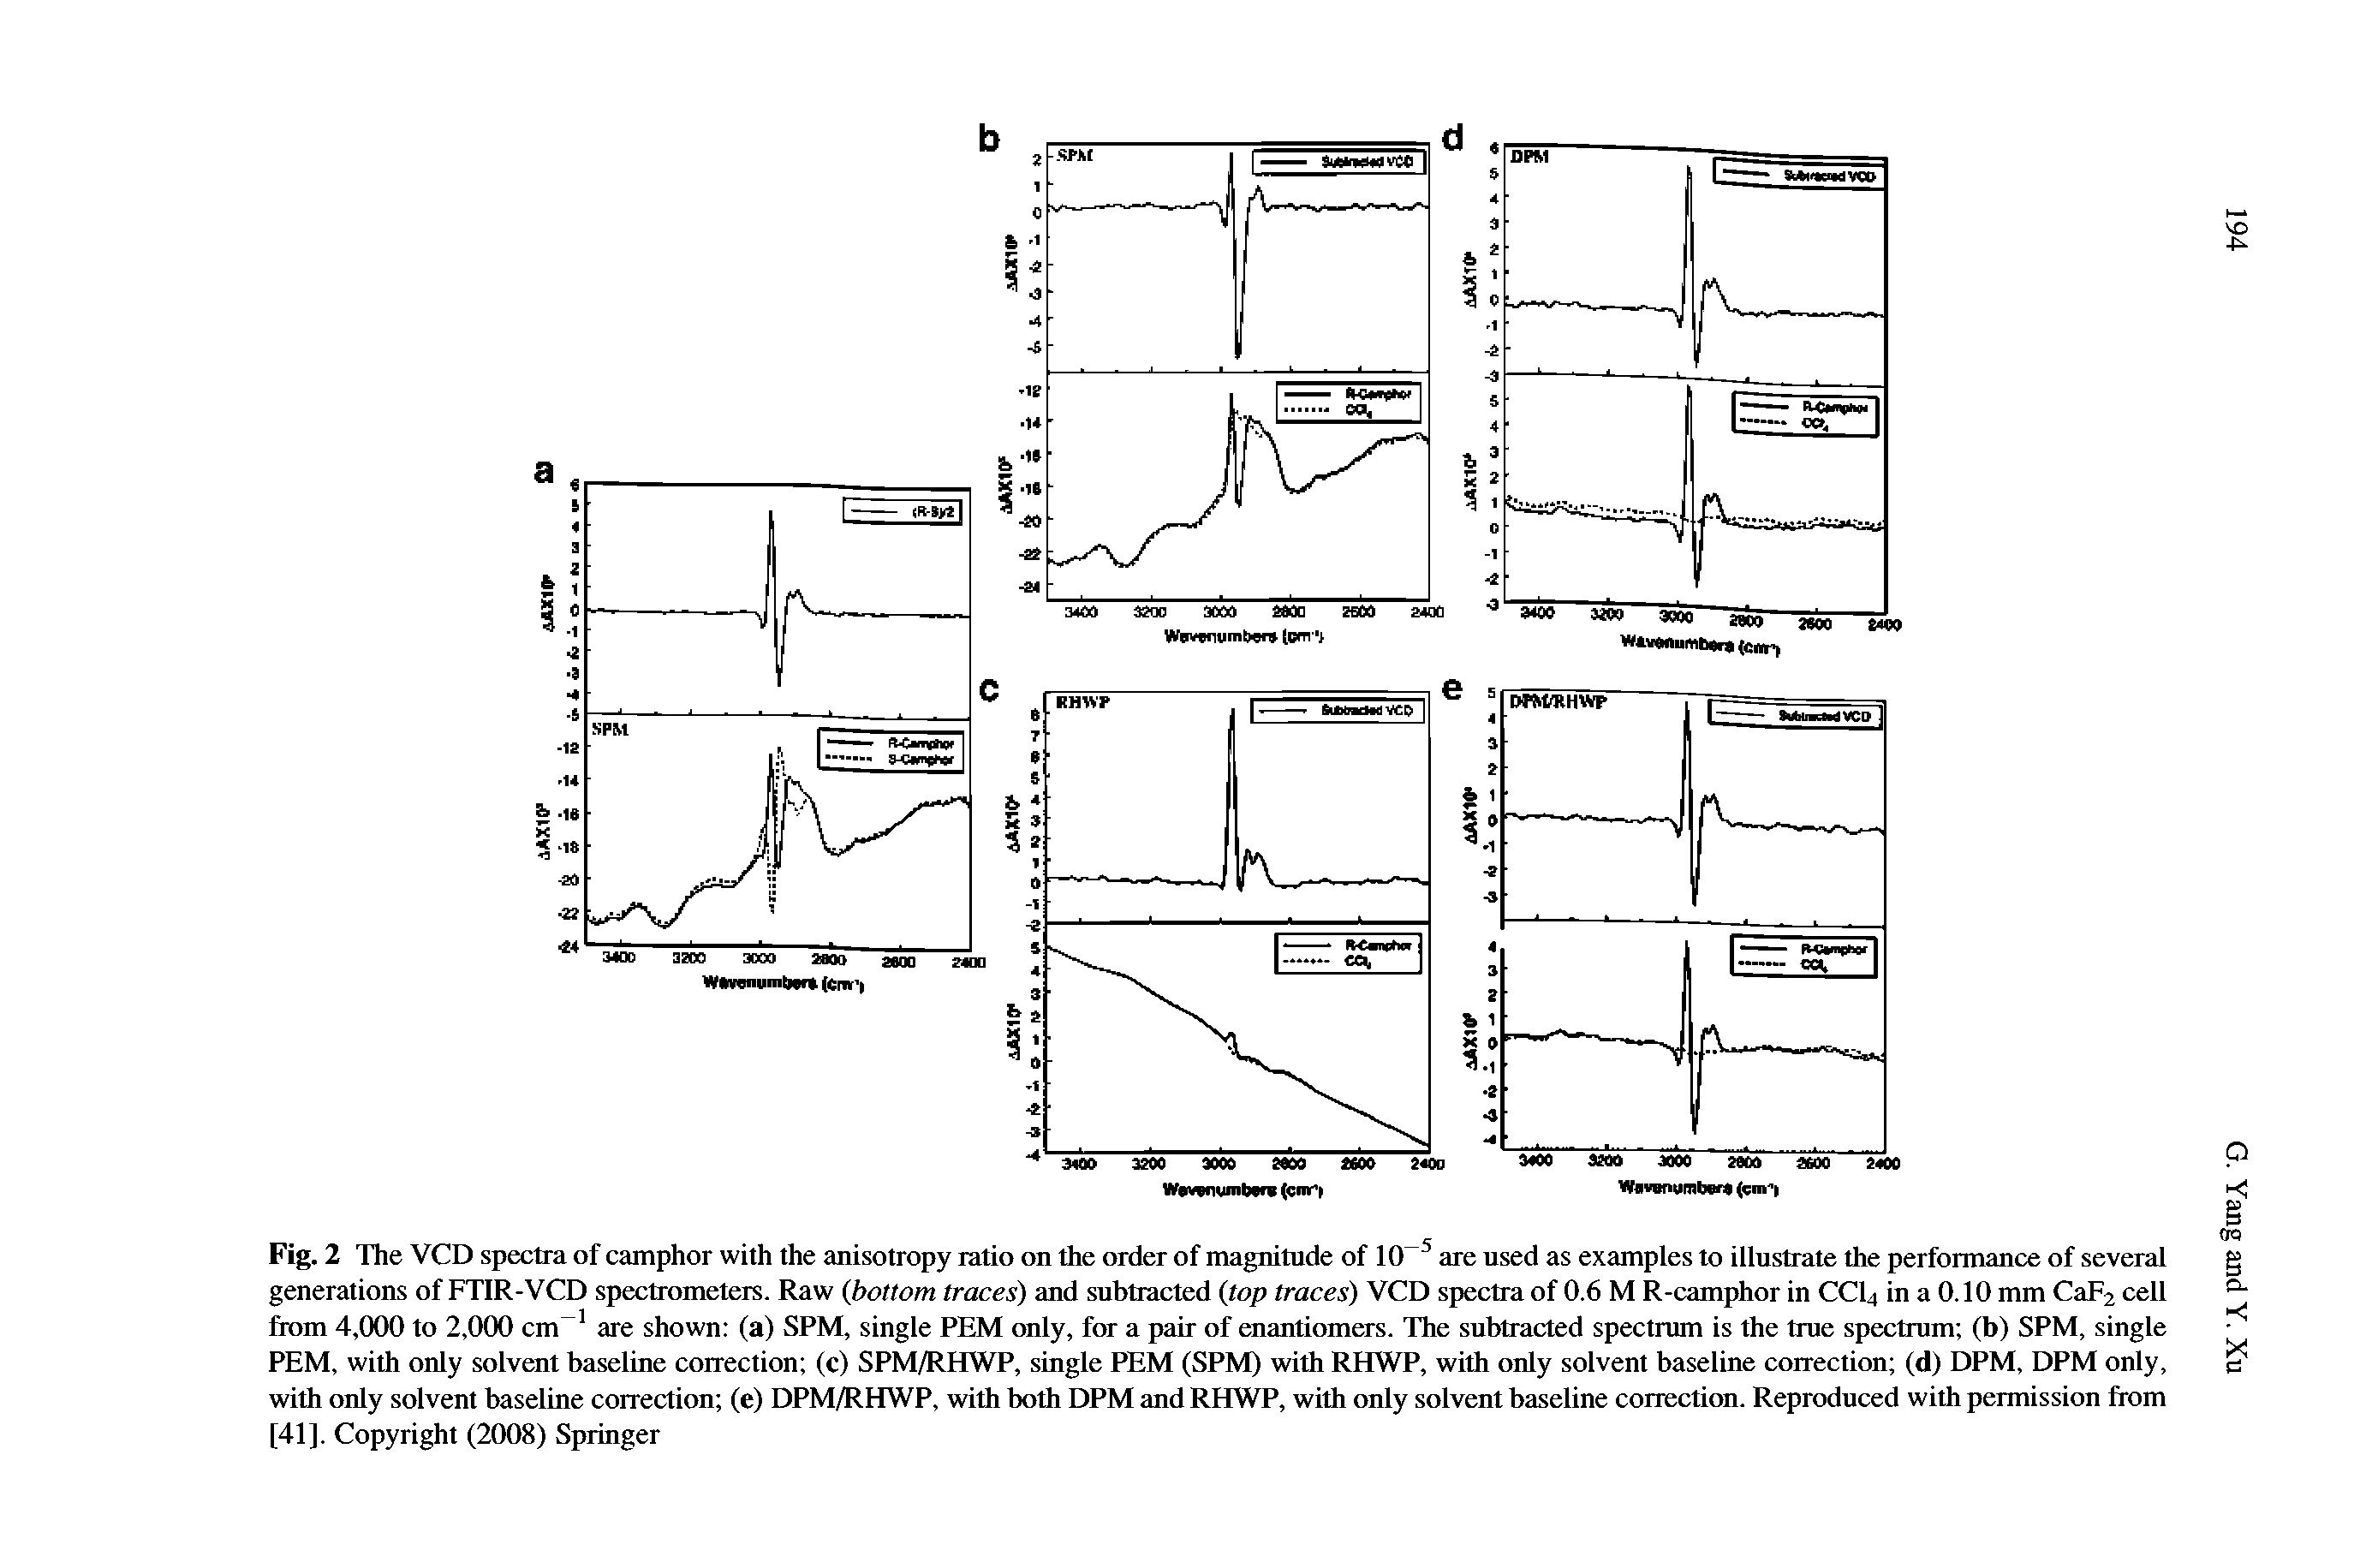 Fig. 2 The VCD spectra of camphor with the anisotropy ratio on the order of magnitude of 10 5 are used as examples to illustrate the performance of several generations of FTIR-VCD spectrometers. Raw (bottom traces) and subtracted (top traces) VCD spectra of 0.6 M R-camphor in CC14 in a 0.10 mm CaF2 cell from 4,000 to 2,000 cm-1 are shown (a) SPM, single PEM only, for a pair of enantiomers. The subtracted spectrum is the true spectrum (b) SPM, single PEM, with only solvent baseline correction (c) SPM/RHWP, single PEM (SPM) with RHWP, with only solvent baseline correction (d) DPM, DPM only, with only solvent baseline correction (e) DPM/RHWP, with both DPM and RHWP, with only solvent baseline correction. Reproduced with permission from [41]. Copyright (2008) Springer...